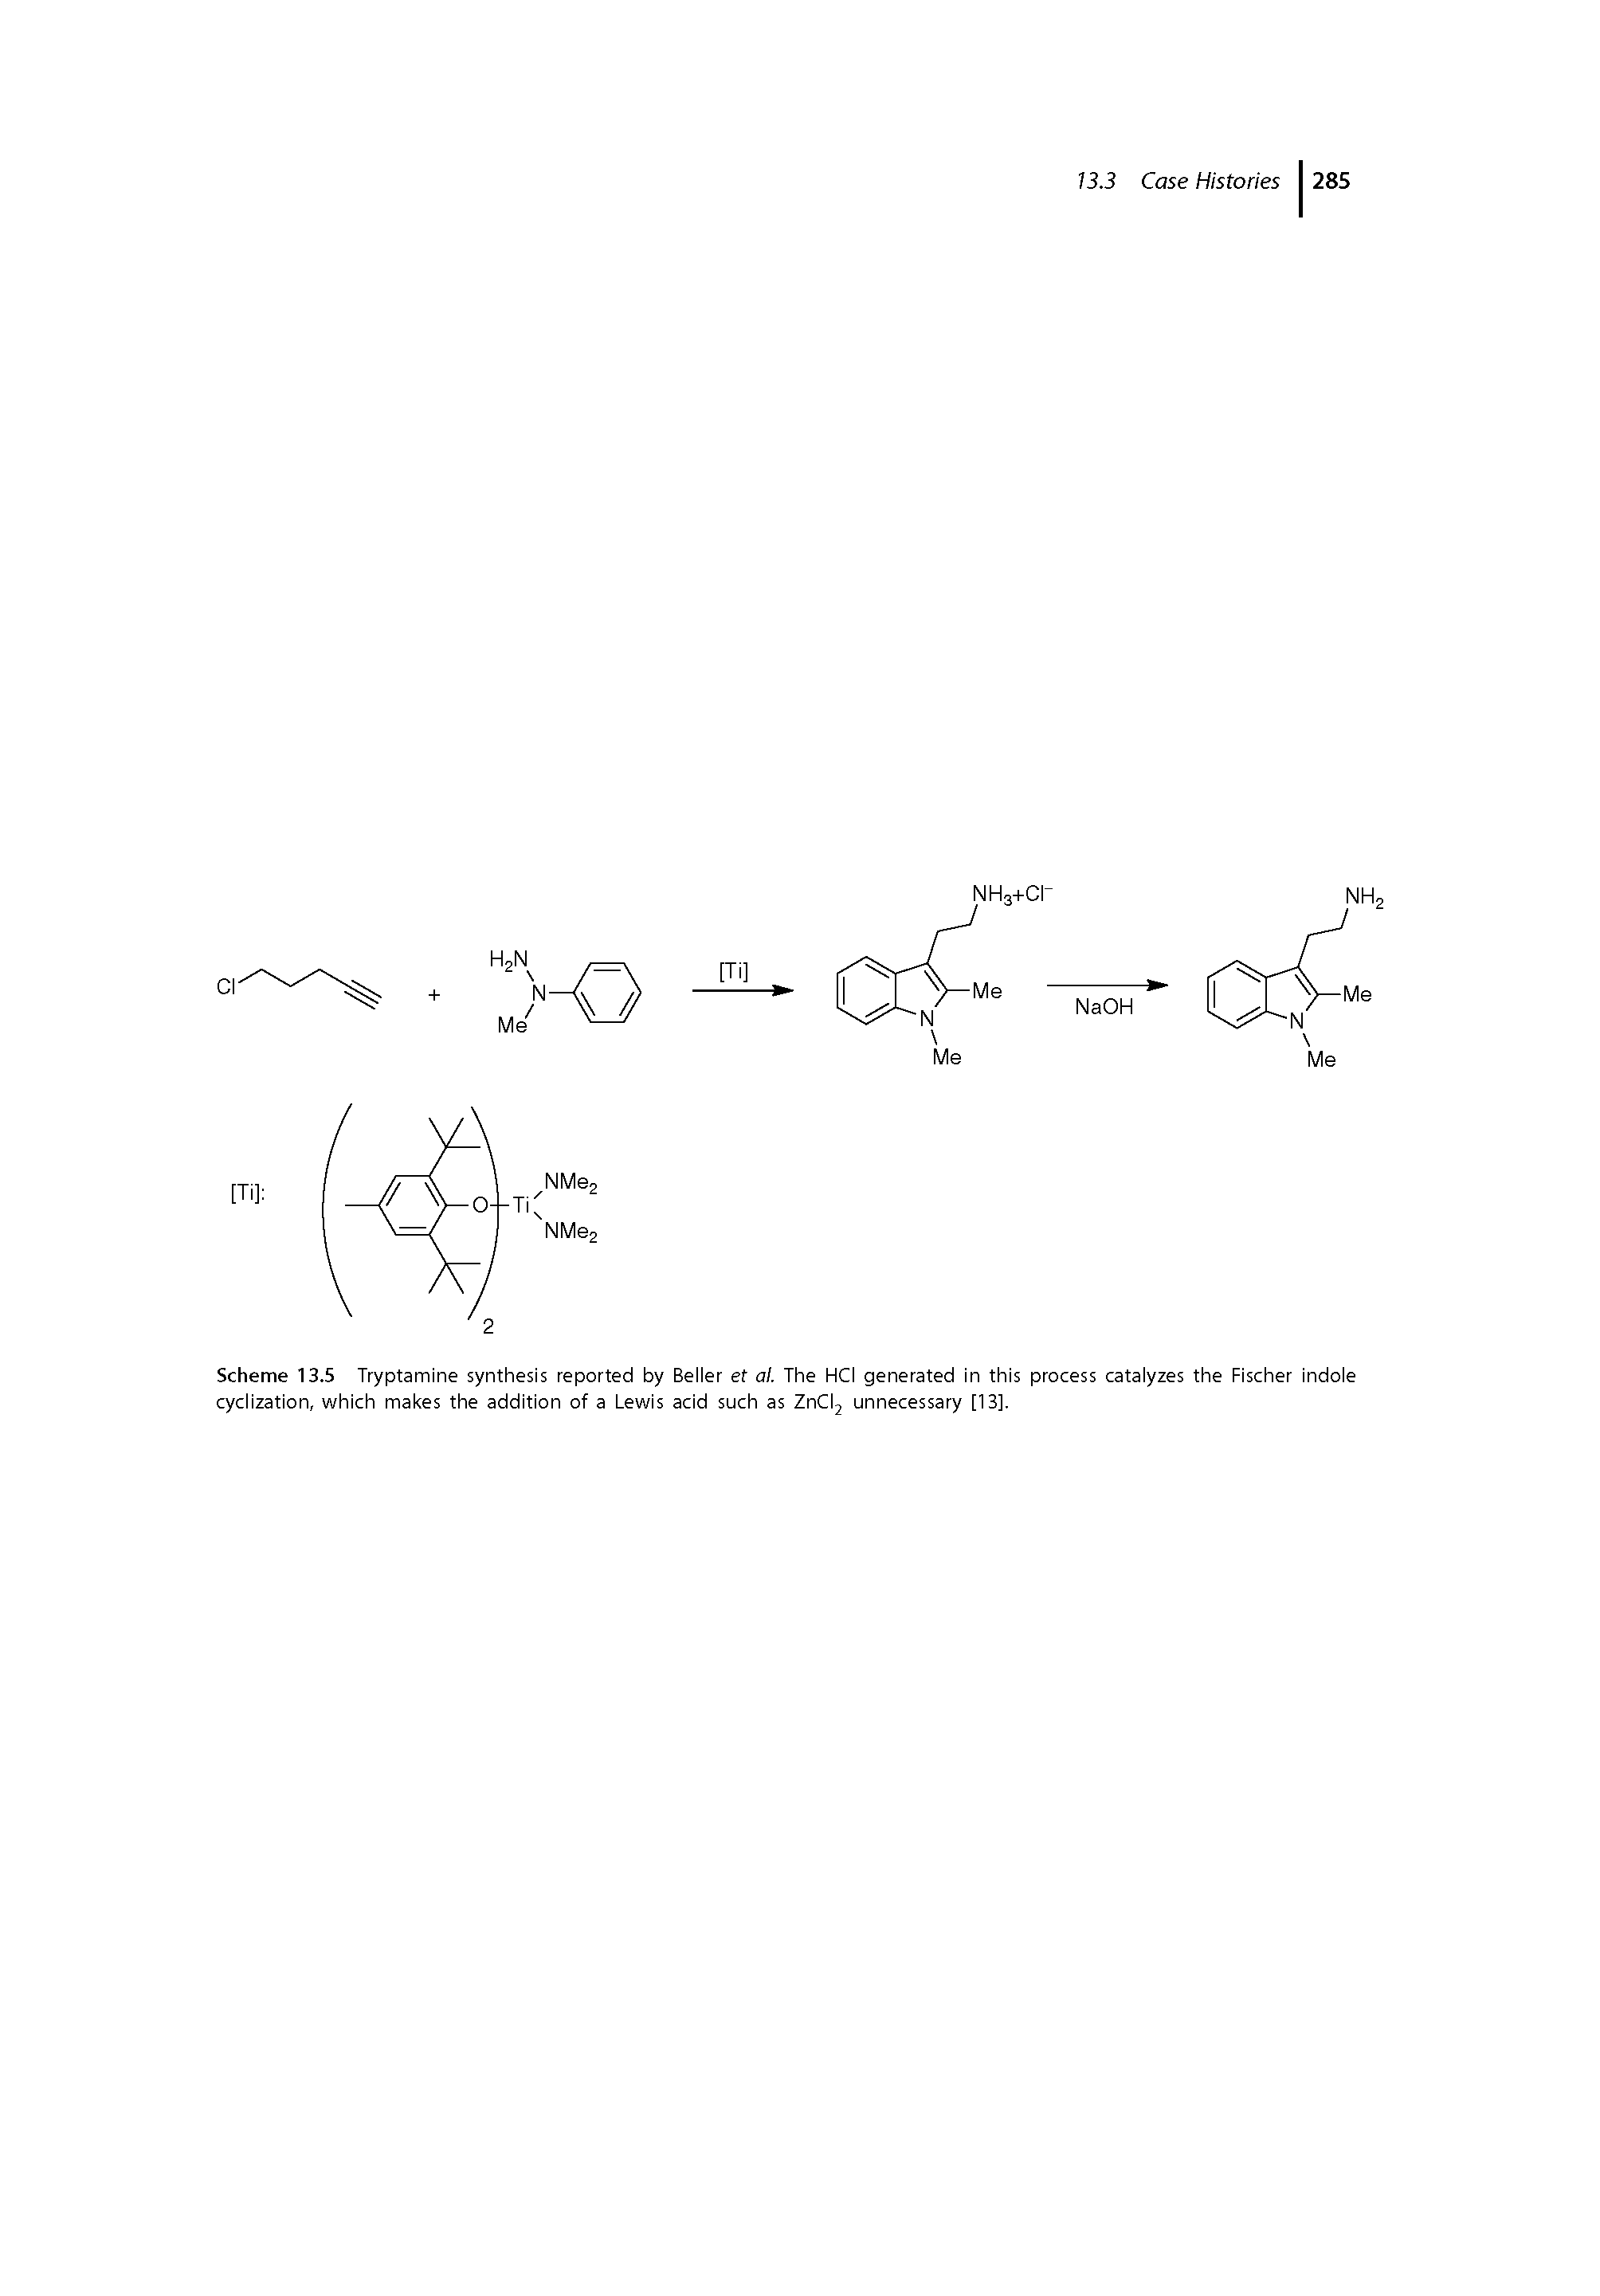 Scheme 13.5 Tryptamine synthesis reported by Beller et al. The HCI generated in this process catalyzes the Fischer indole cyclization, which makes the addition of a Lewis acid such as ZnCl2 unnecessary [13].